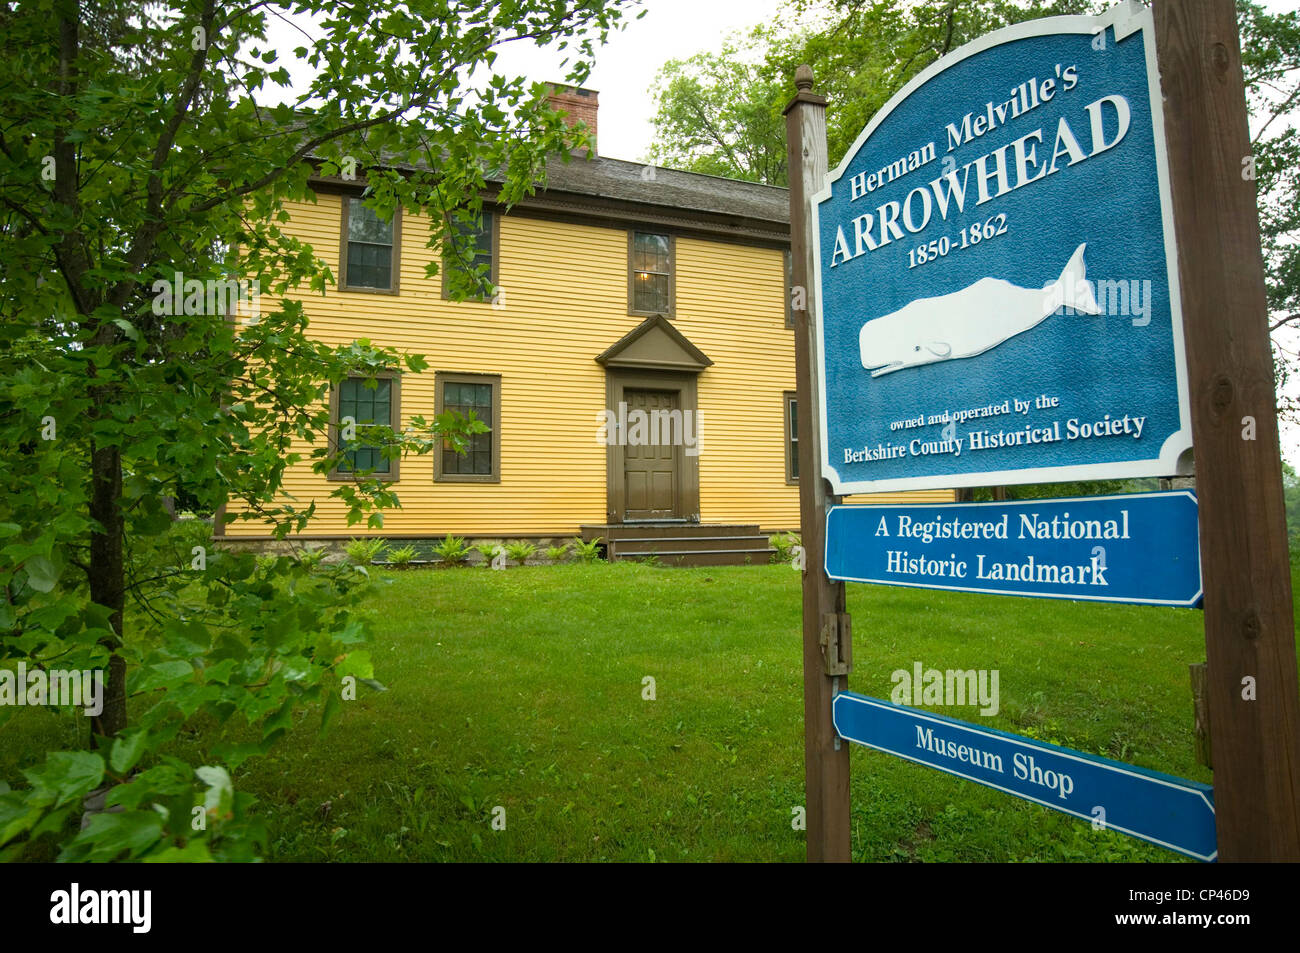 United States of America Pittsfield, Massachusetts, 'Arrowhead,' home of Herman Melville from 1850 to 1862 where he wrote Stock Photo